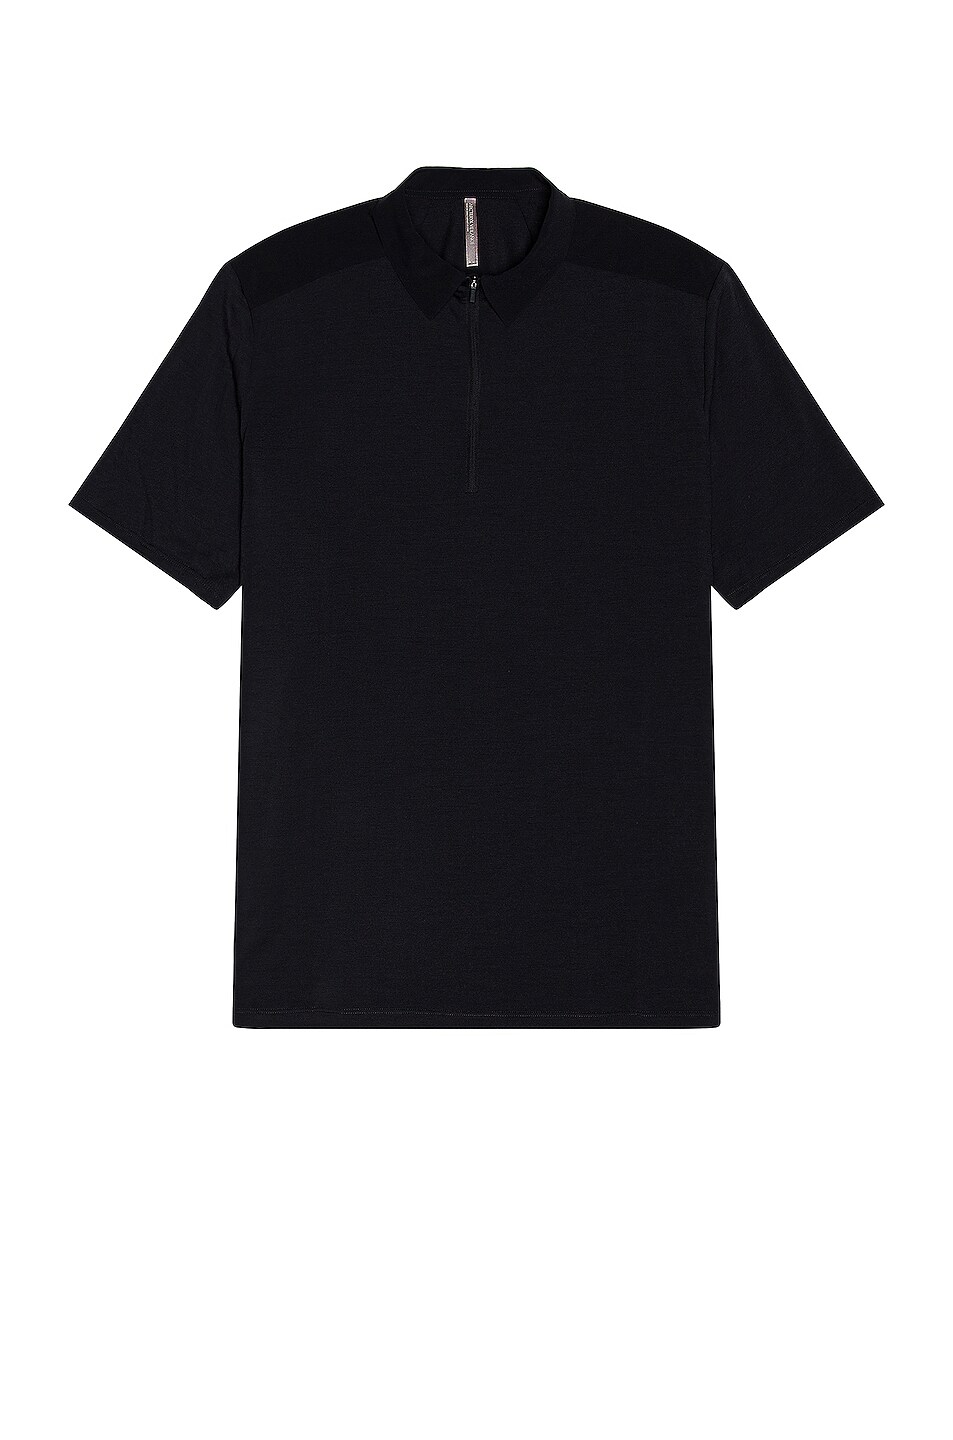 Image 1 of Veilance Frame Polo Shirt in Black